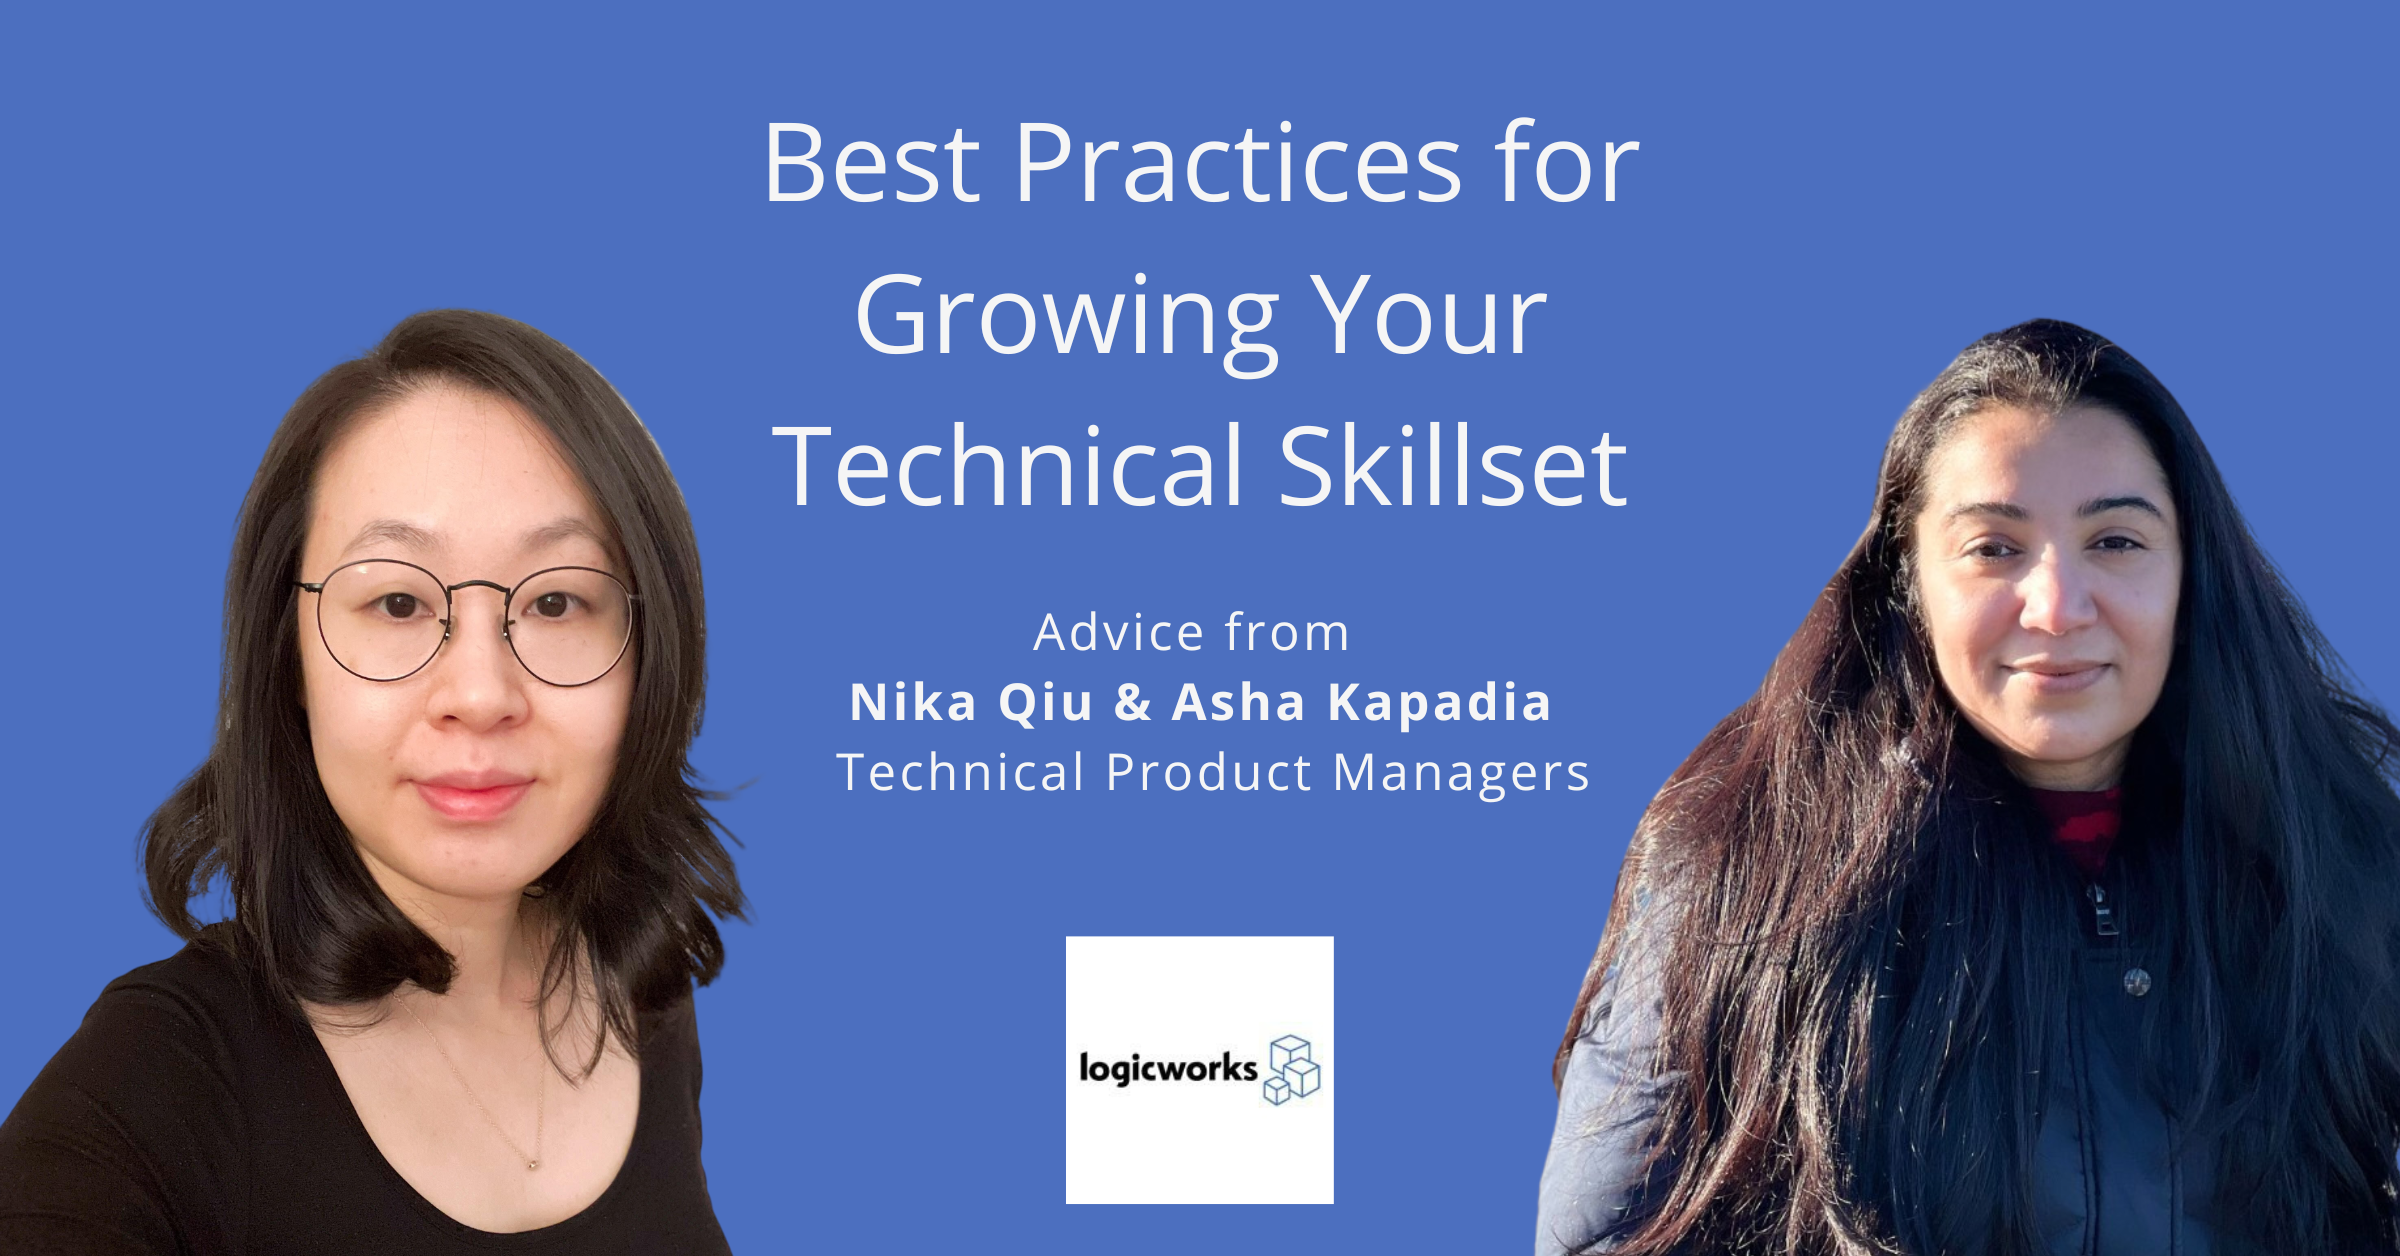 Best Practices for Growing Your Technical Skillset